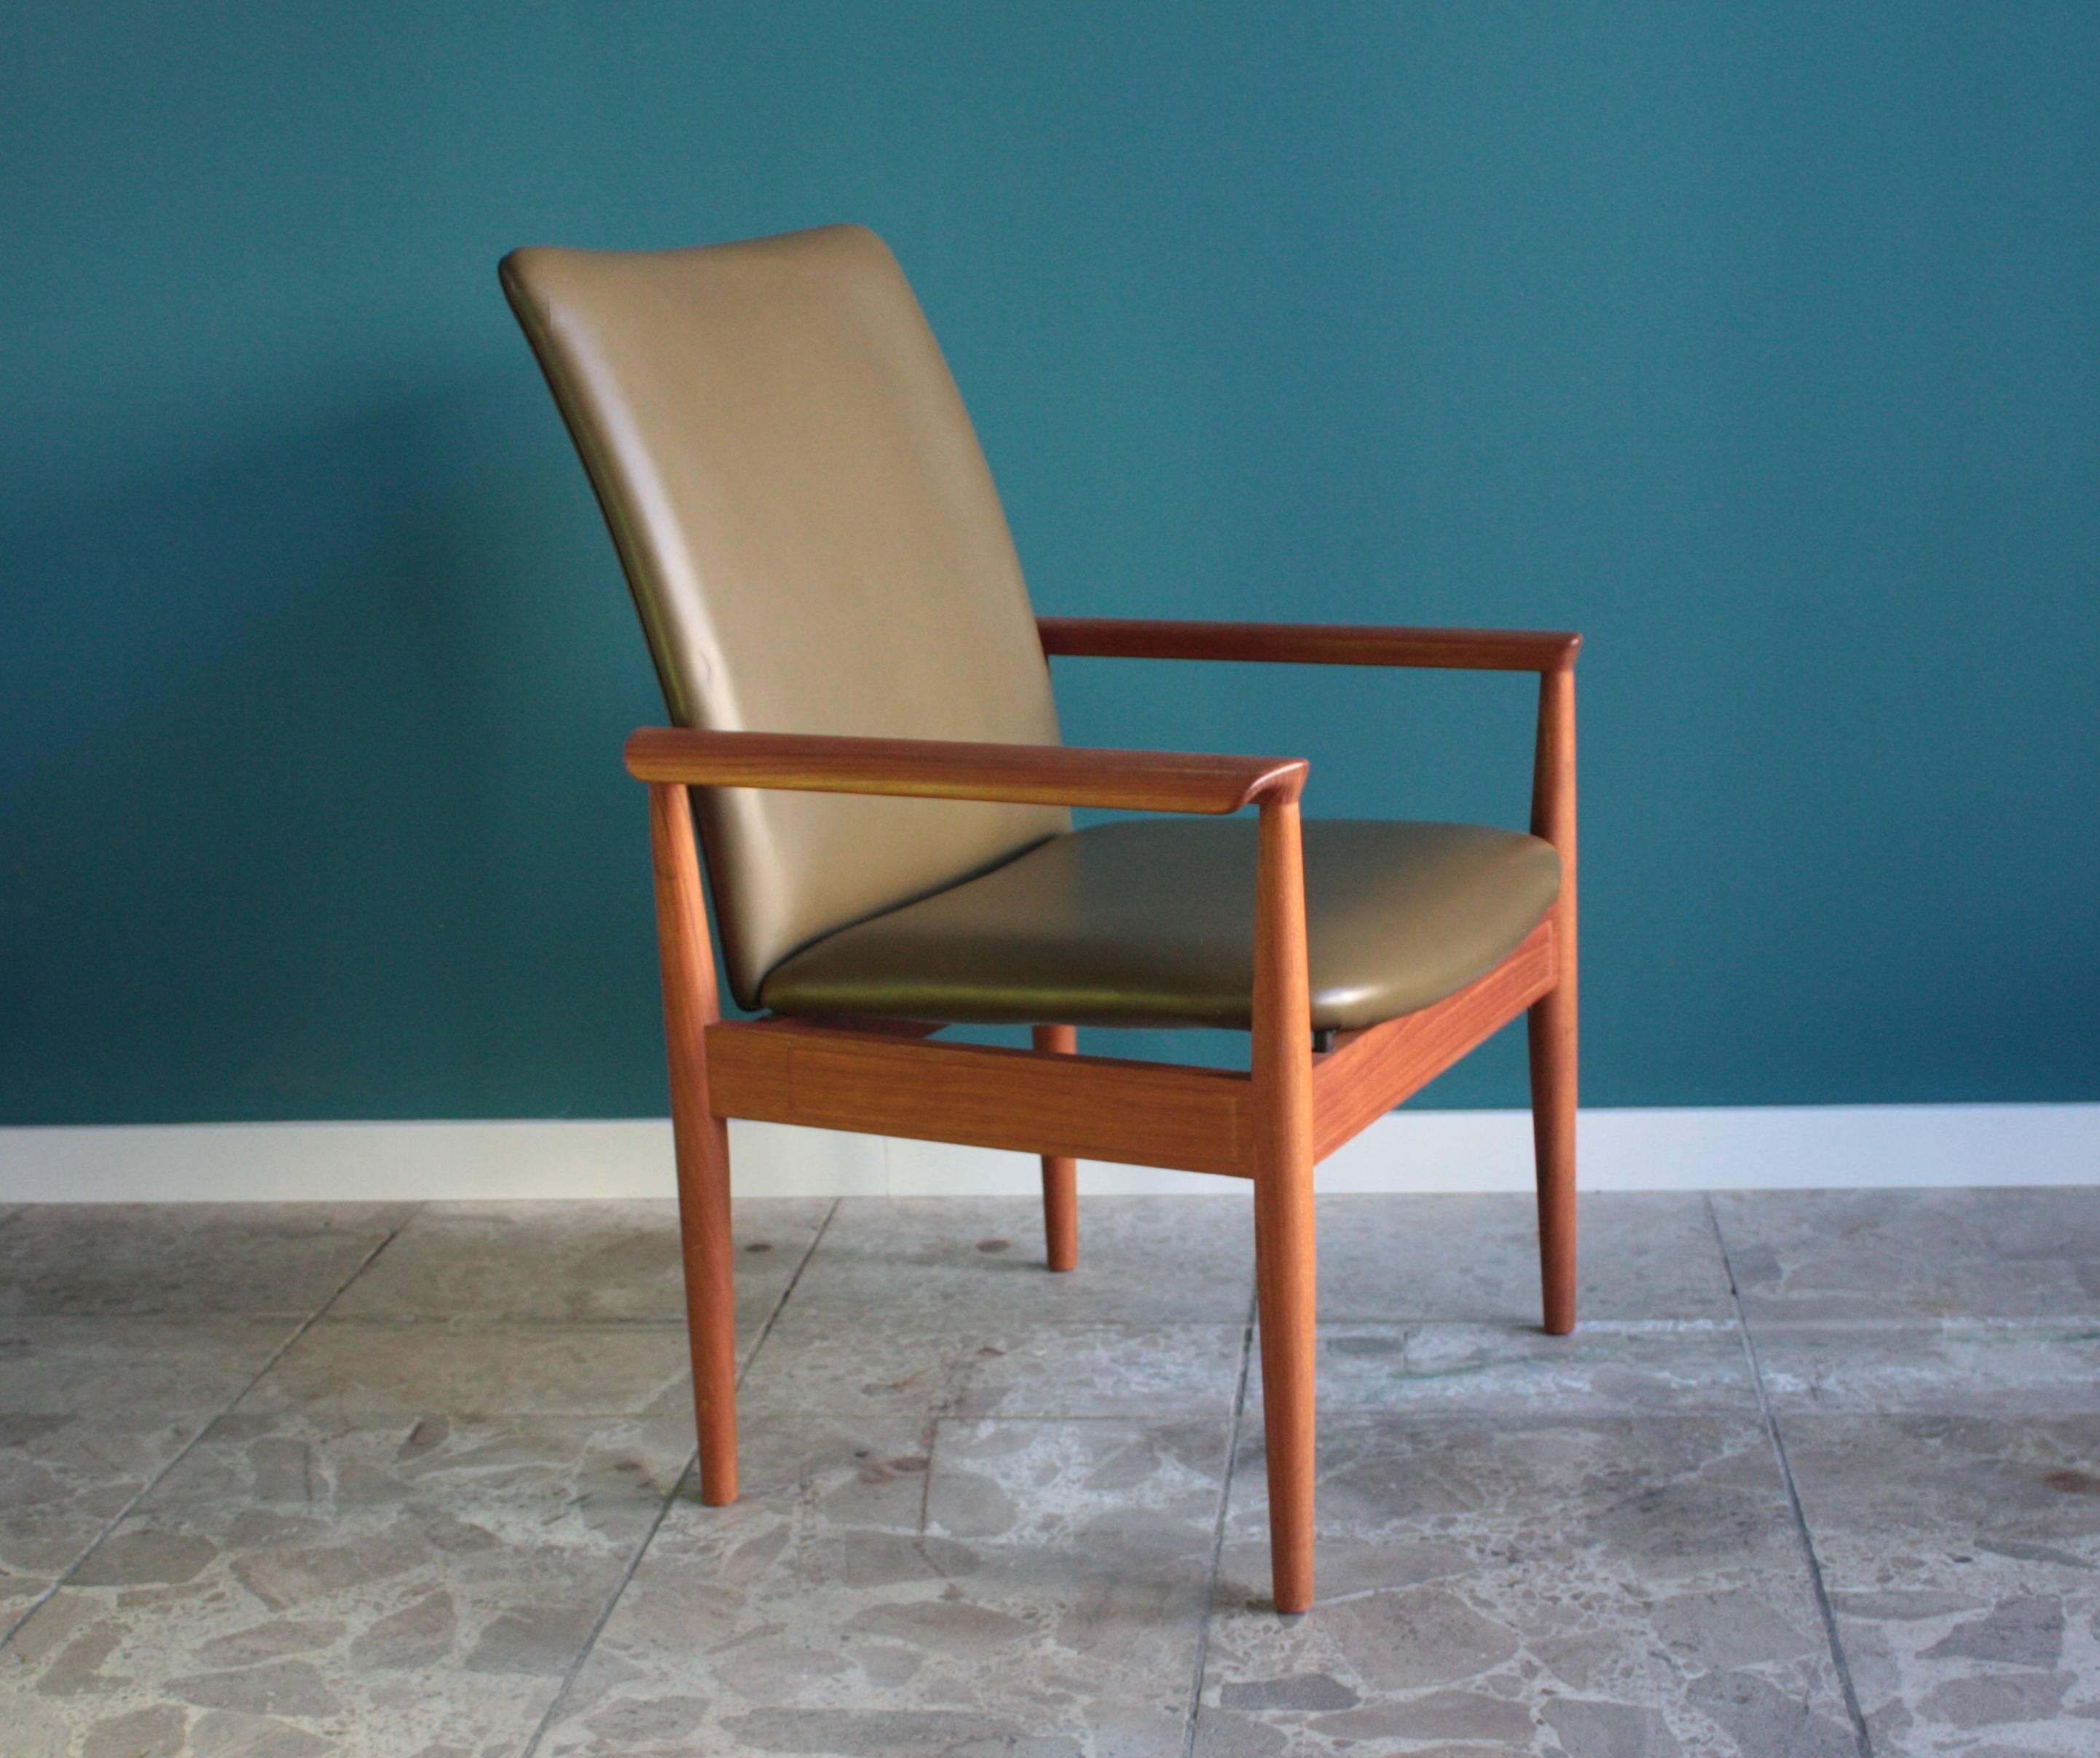 This Diplomat chair was designed by Finn Juhl. It was manufactured by Cado and features a frame made from teak. The chair is upholstered in olive green leather and has a high and flexible backrest. It is in a very good vintage condition.